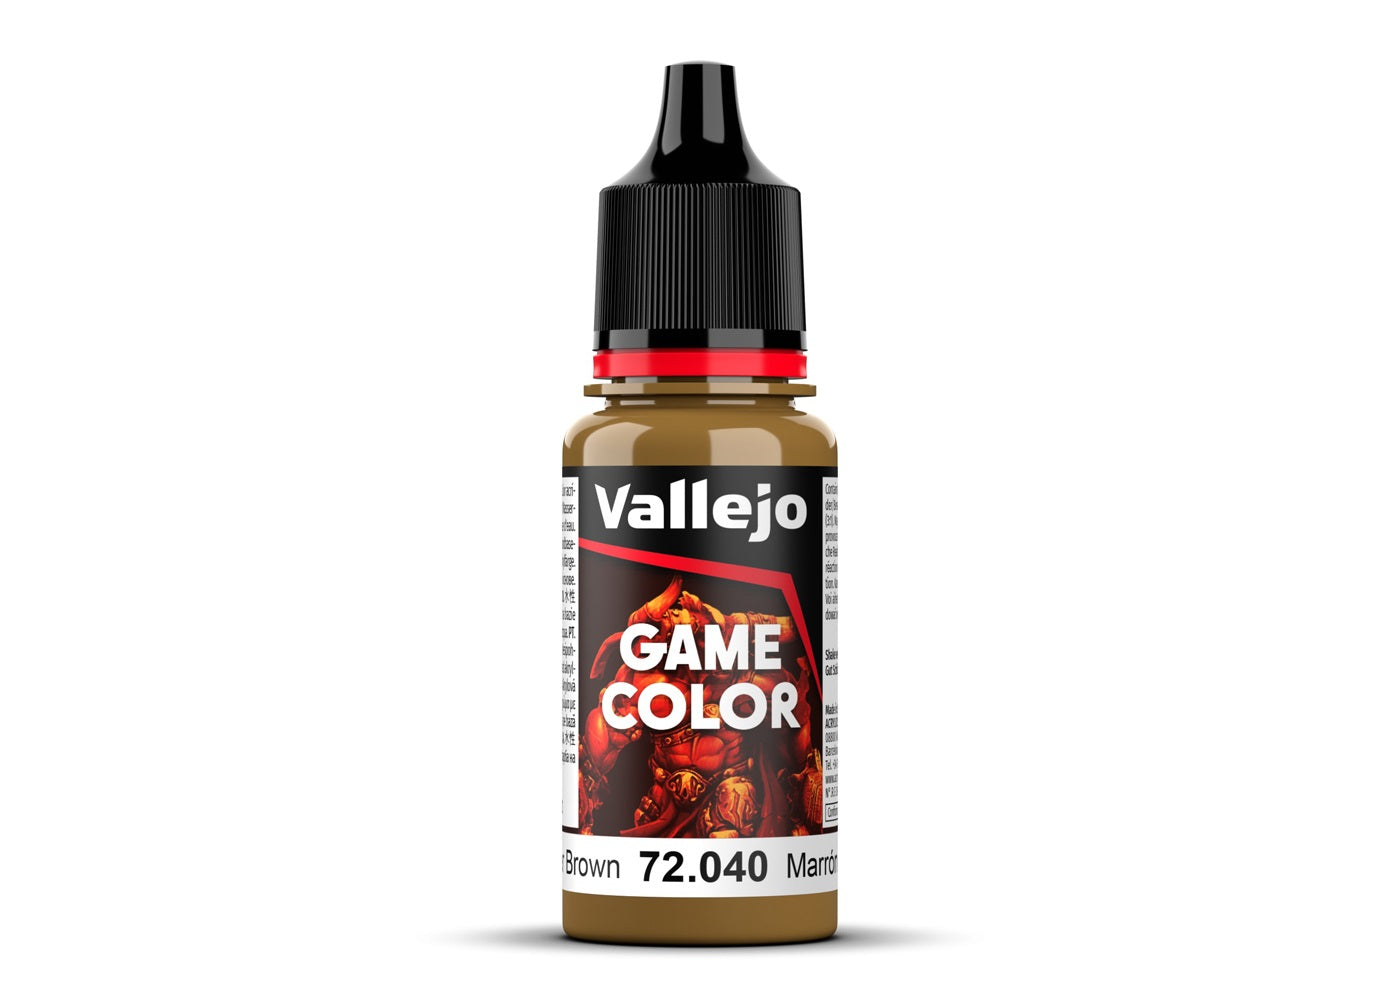 Vallejo Game Color Leather Brown - 18ml